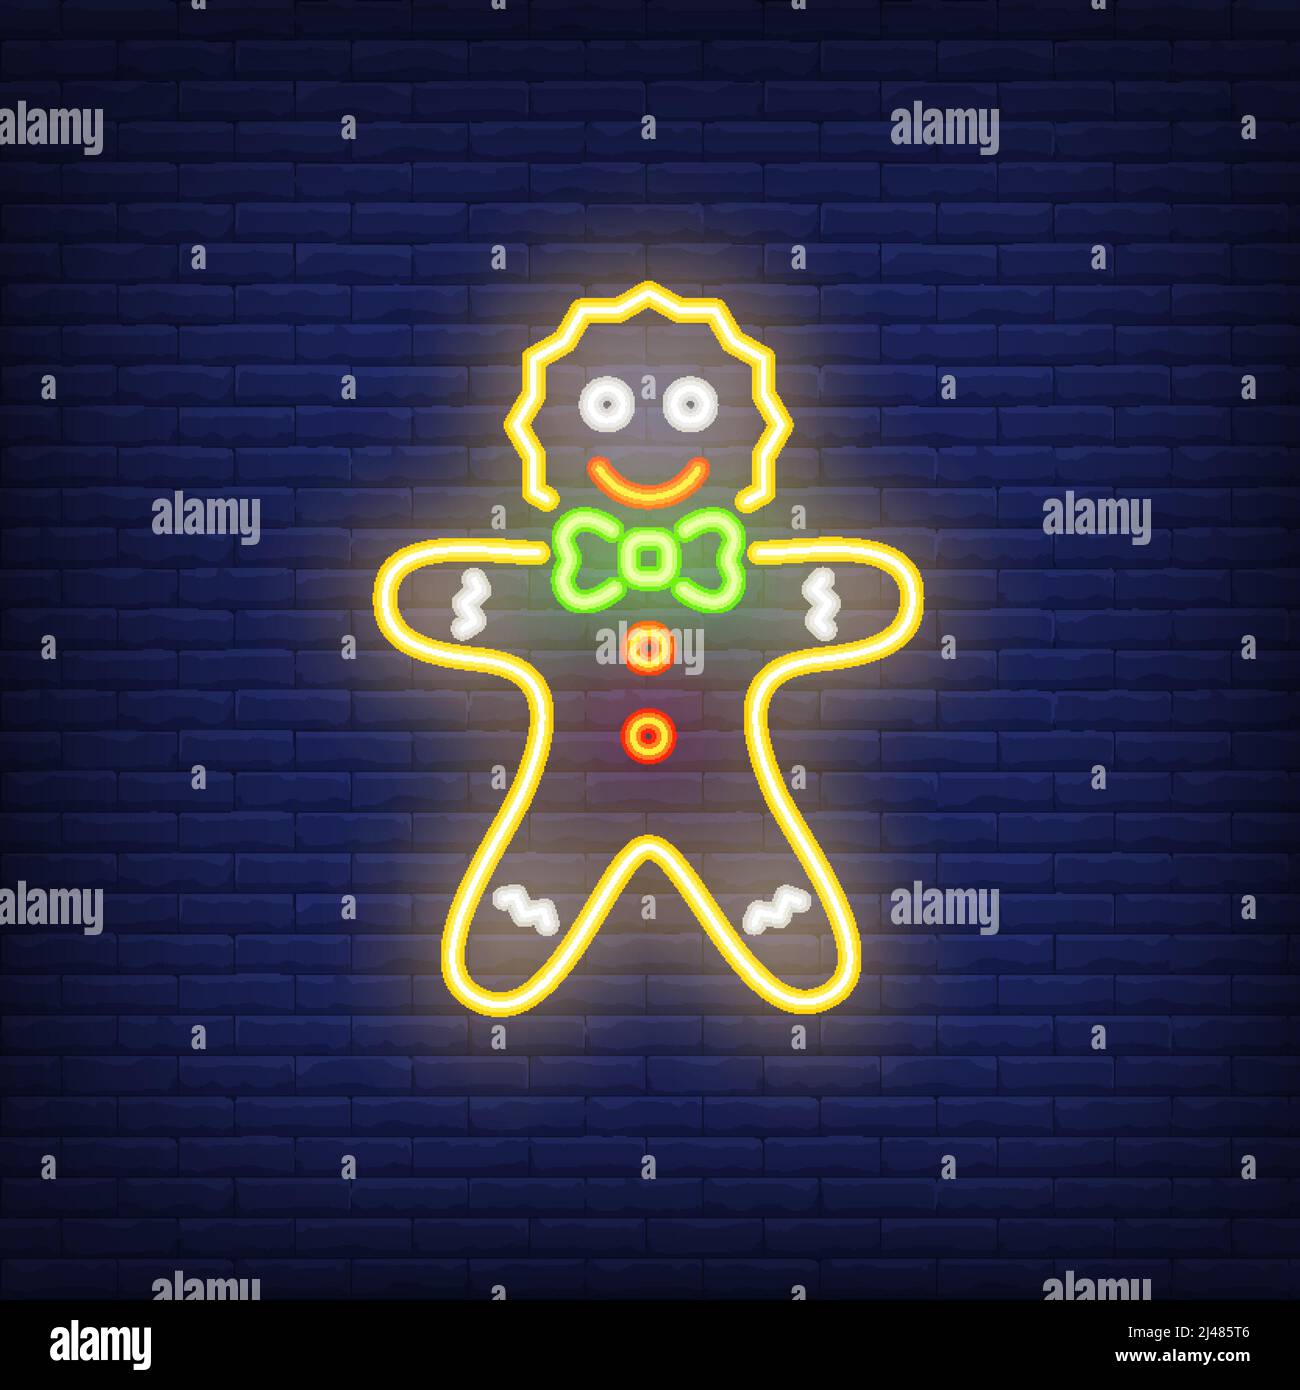 Gingerbread man neon cartoon character. Night bright advertisement element. Neon festive design for New Year, Christmas, celebration, greeting cards Stock Vector